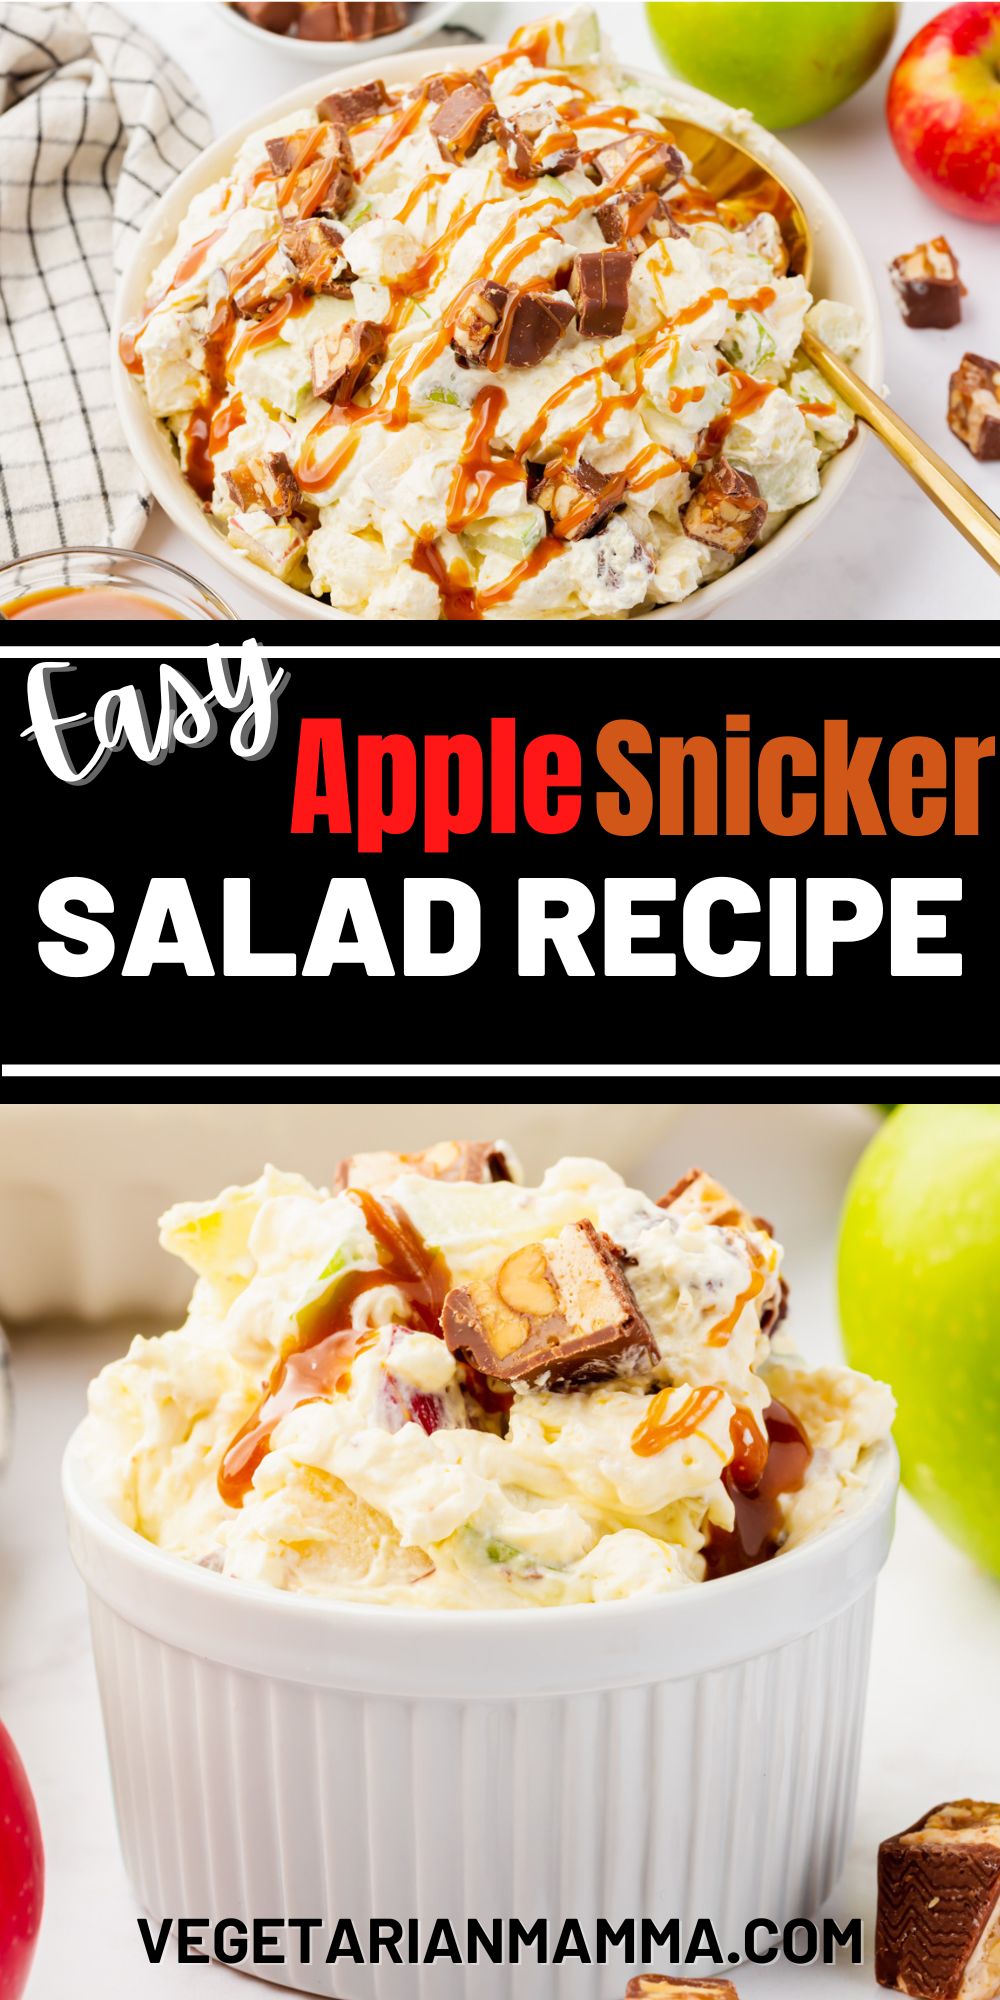 This Apple Snicker Salad is a beautifully layered dessert that is perfect for cookouts and backyard BBQs! Yes, it's just like Grandma used to make!